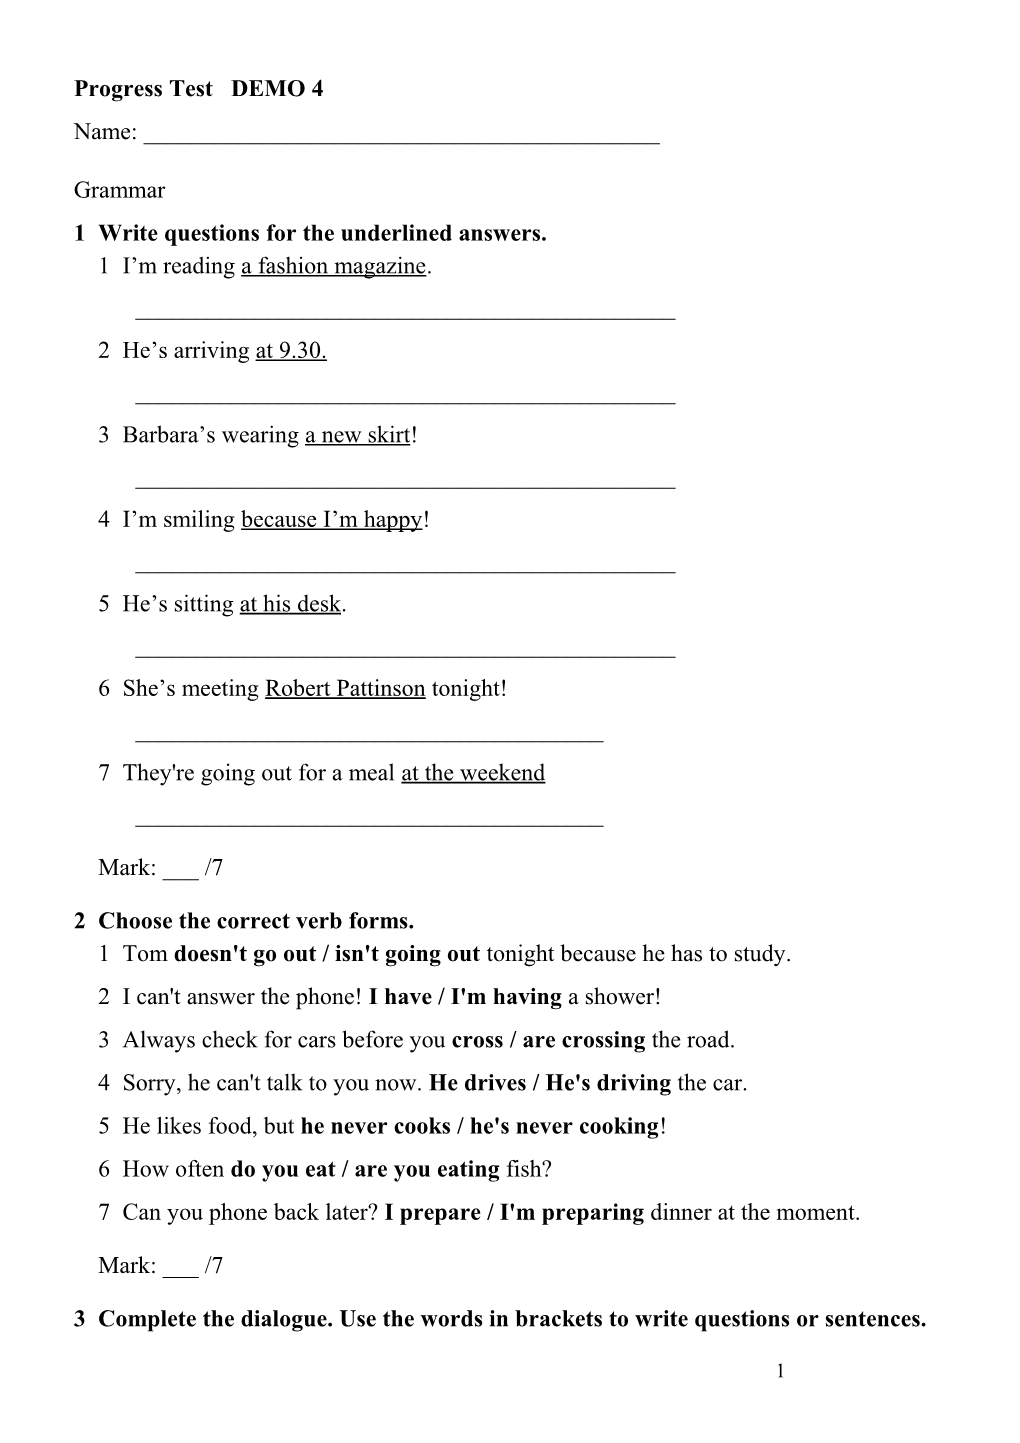 1Write Questions for the Underlined Answers